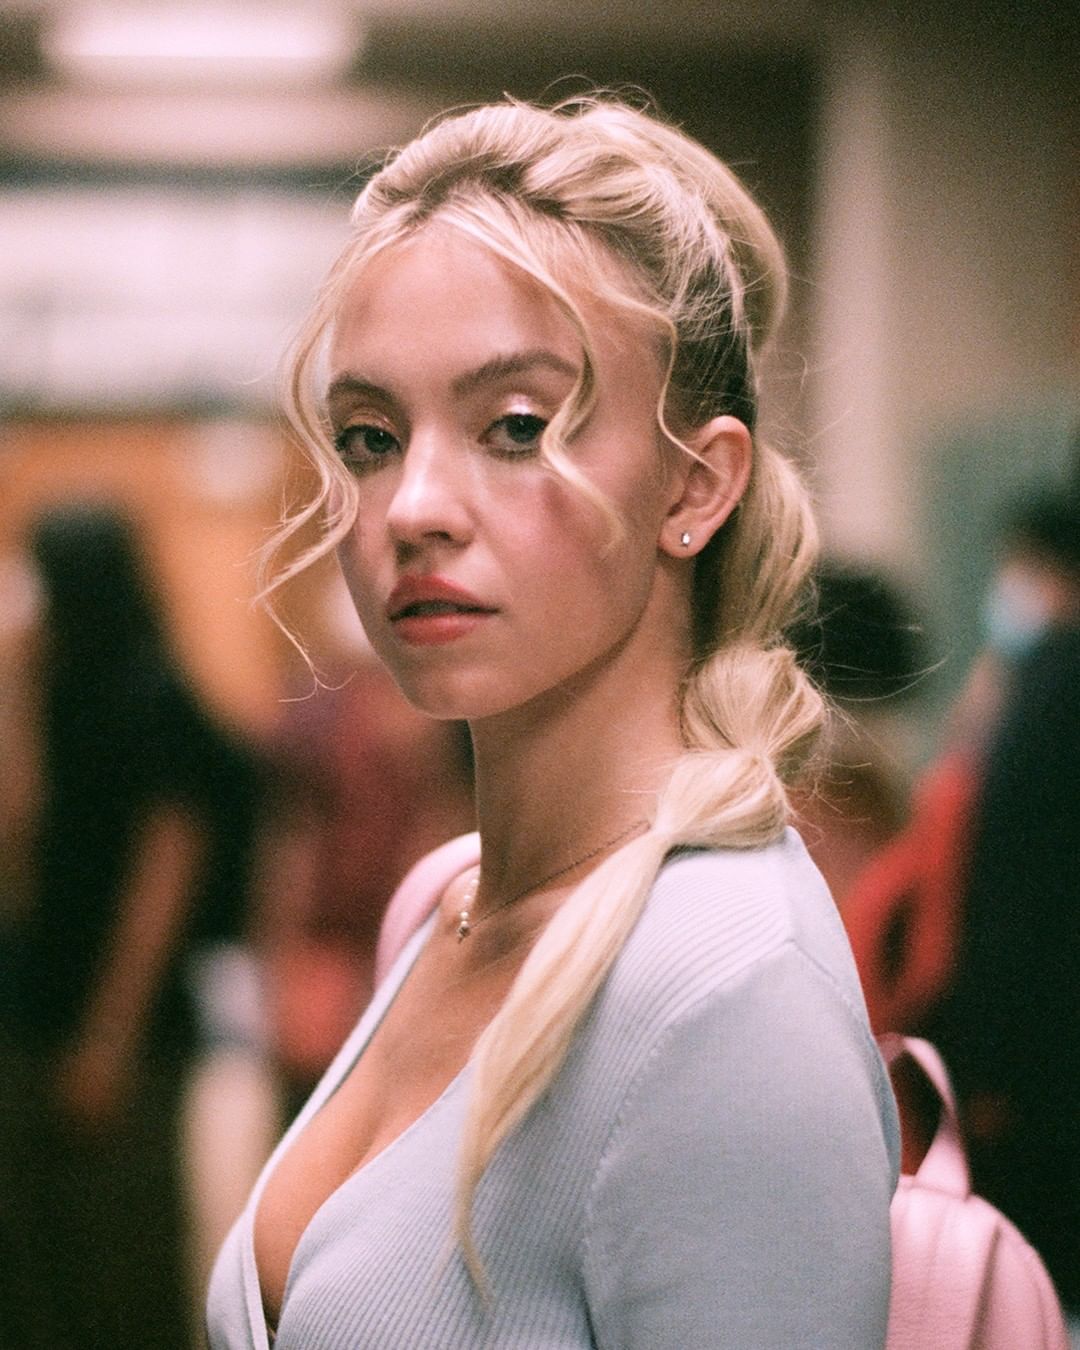 Sydney Sweeney som Cassie Howard (A24/HBO Max)